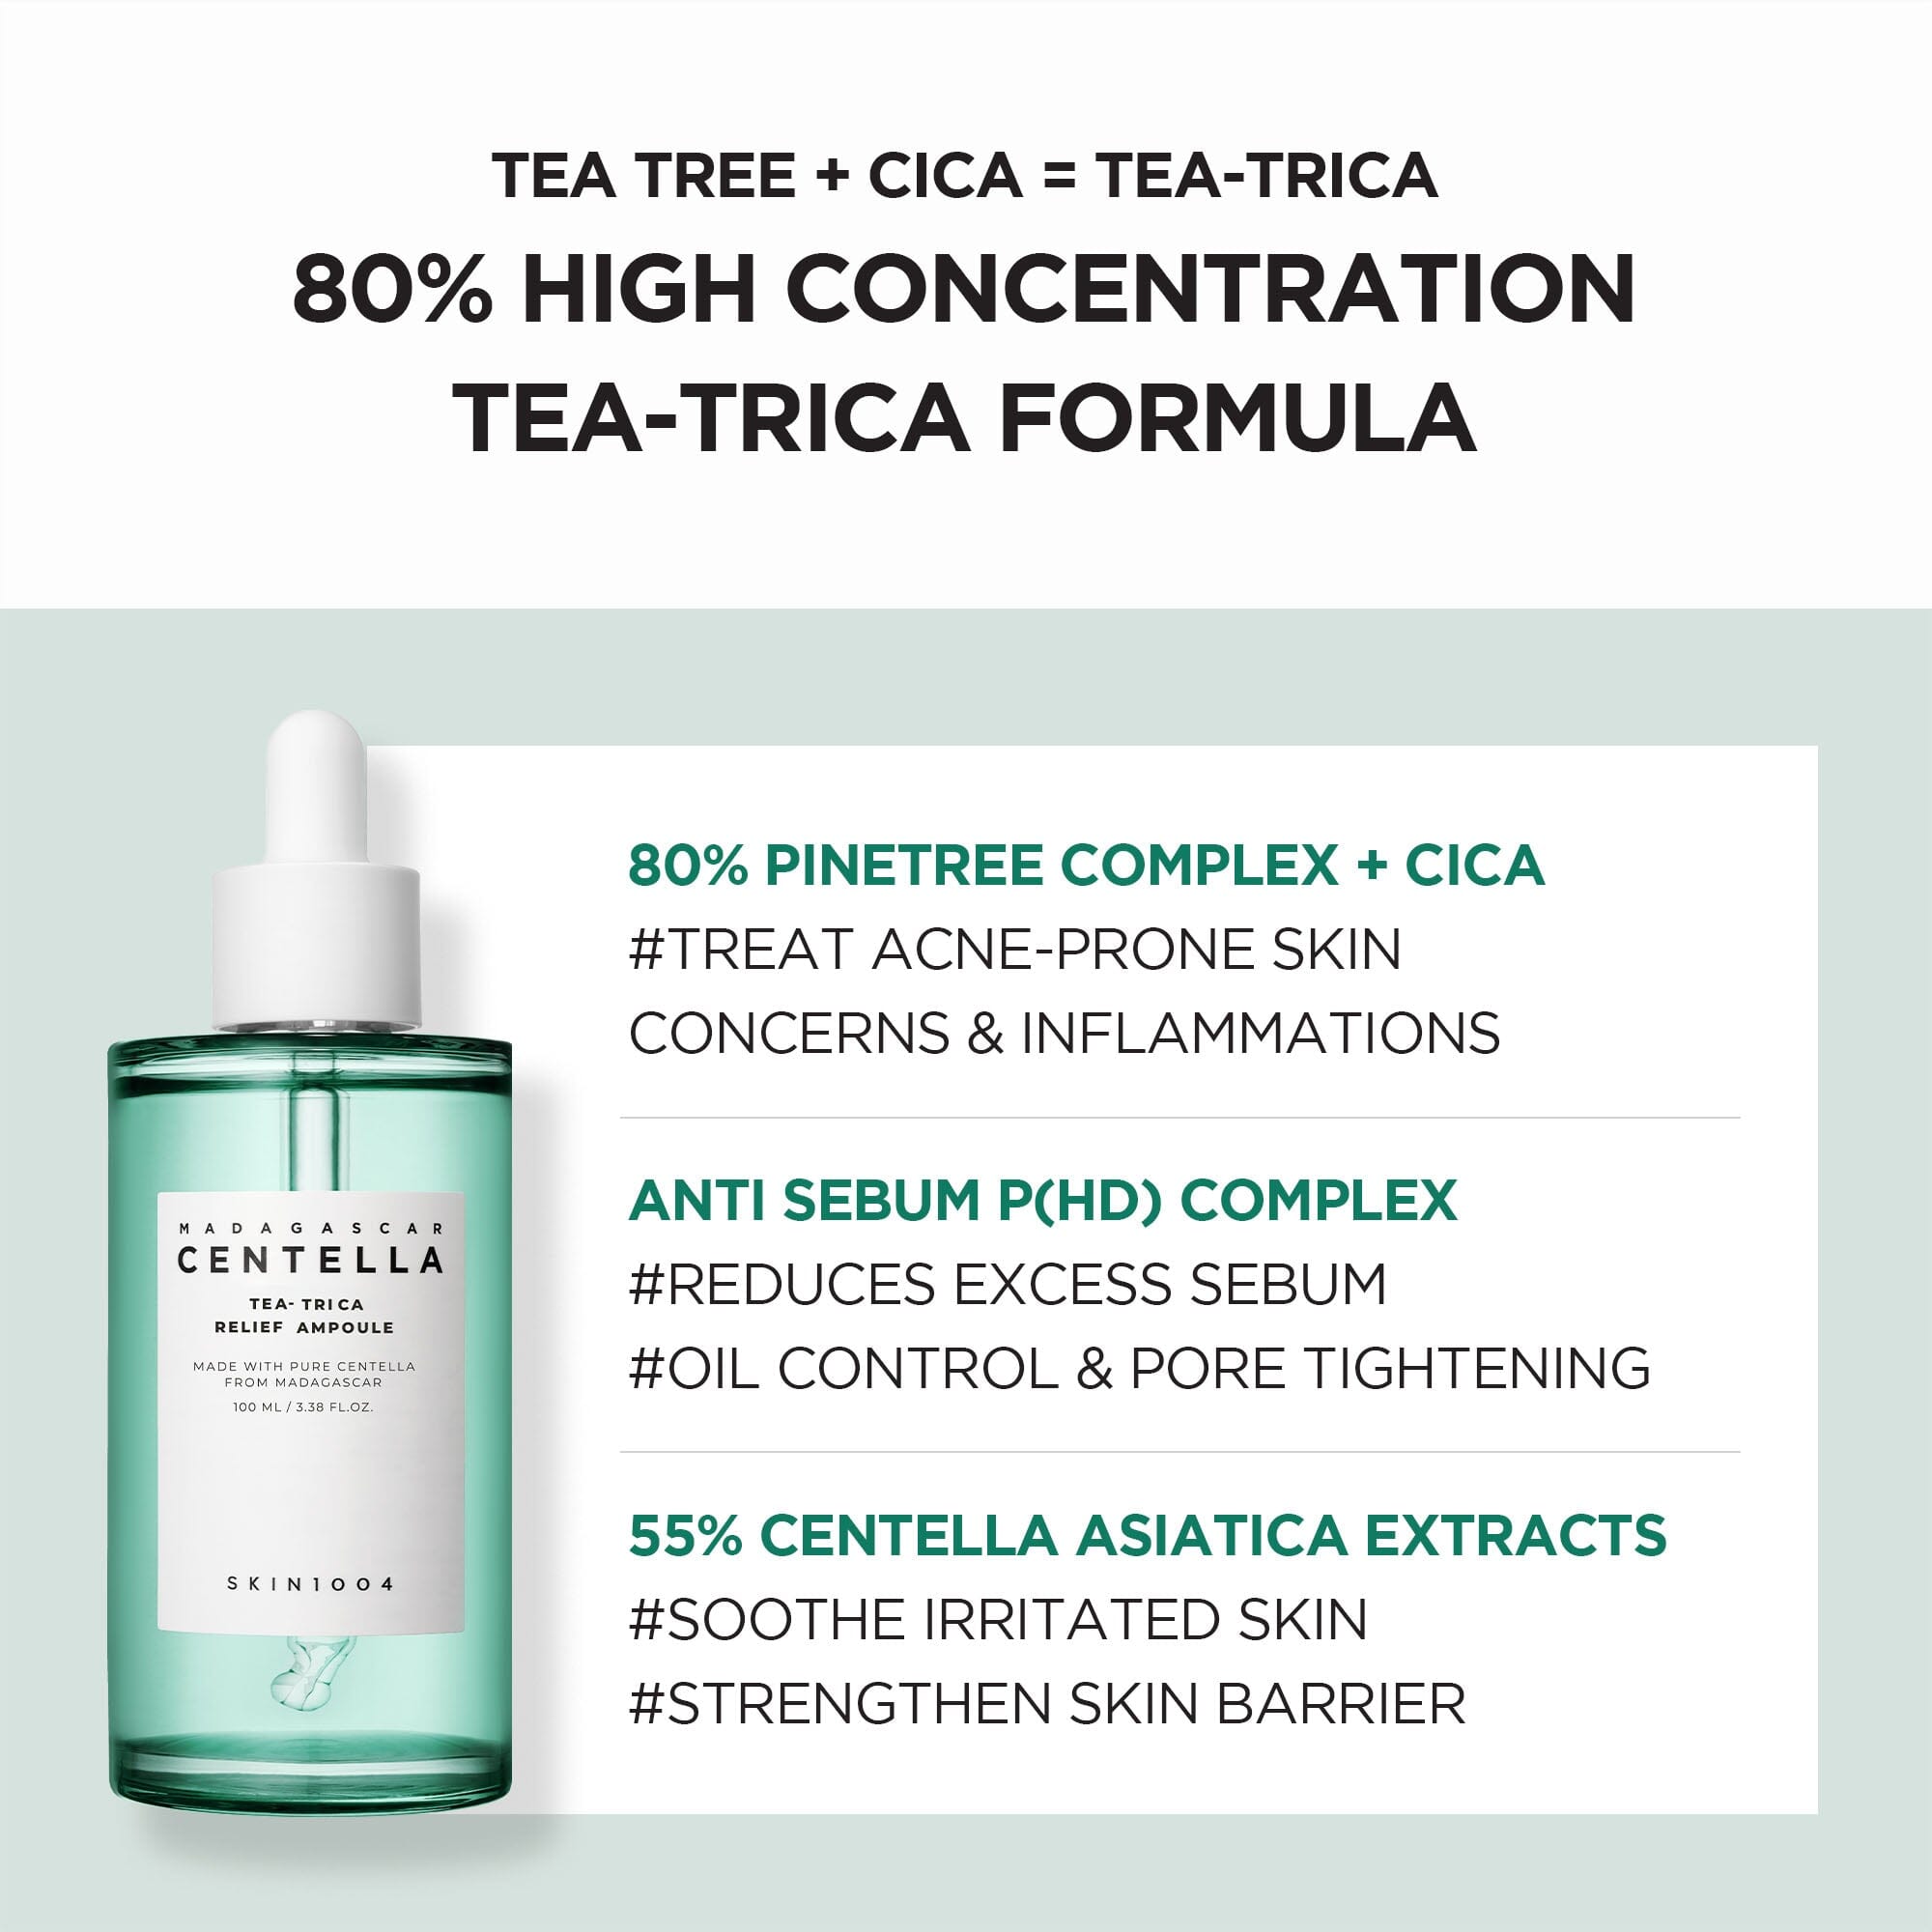 SKIN1004 Madagascar Centella Tea-Trica Relief Ampoule 30ml, at Orion Beauty. SKIN1004 Official Sole Authorized Retailer in Sri Lanka!